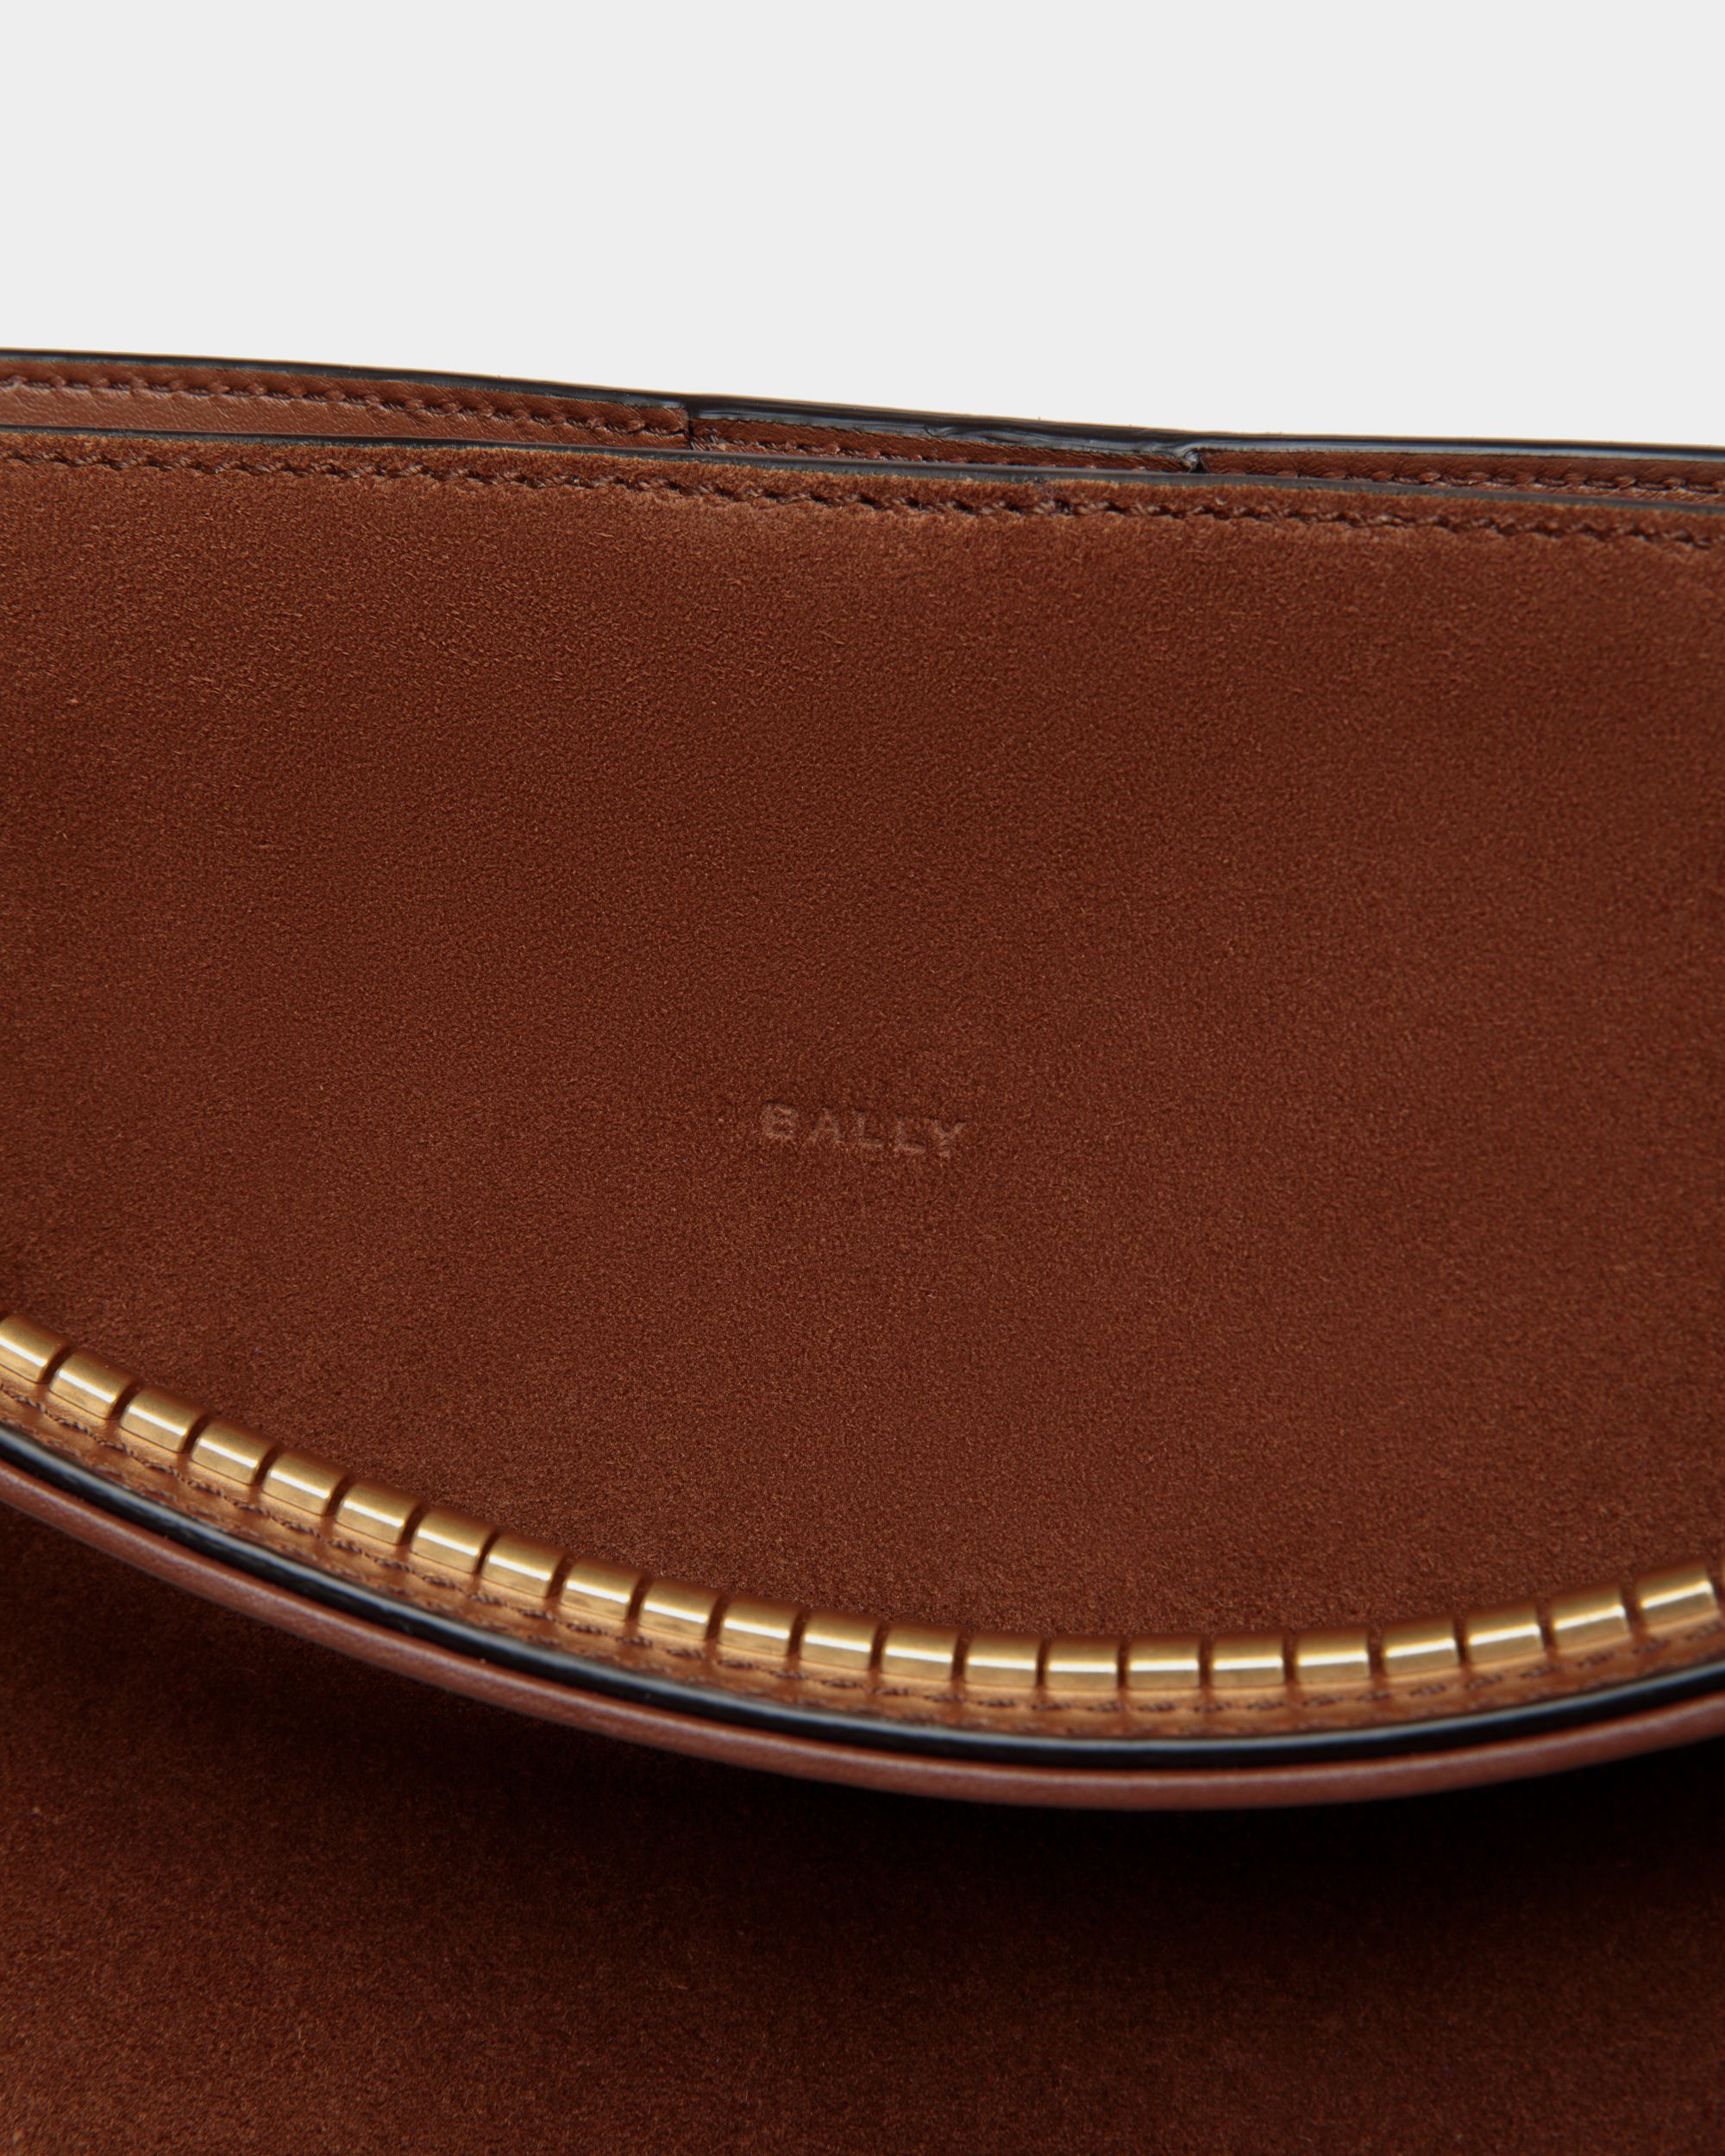 Arkle | Women's Hobo Bag in Brown Suede | Bally | Still Life Detail